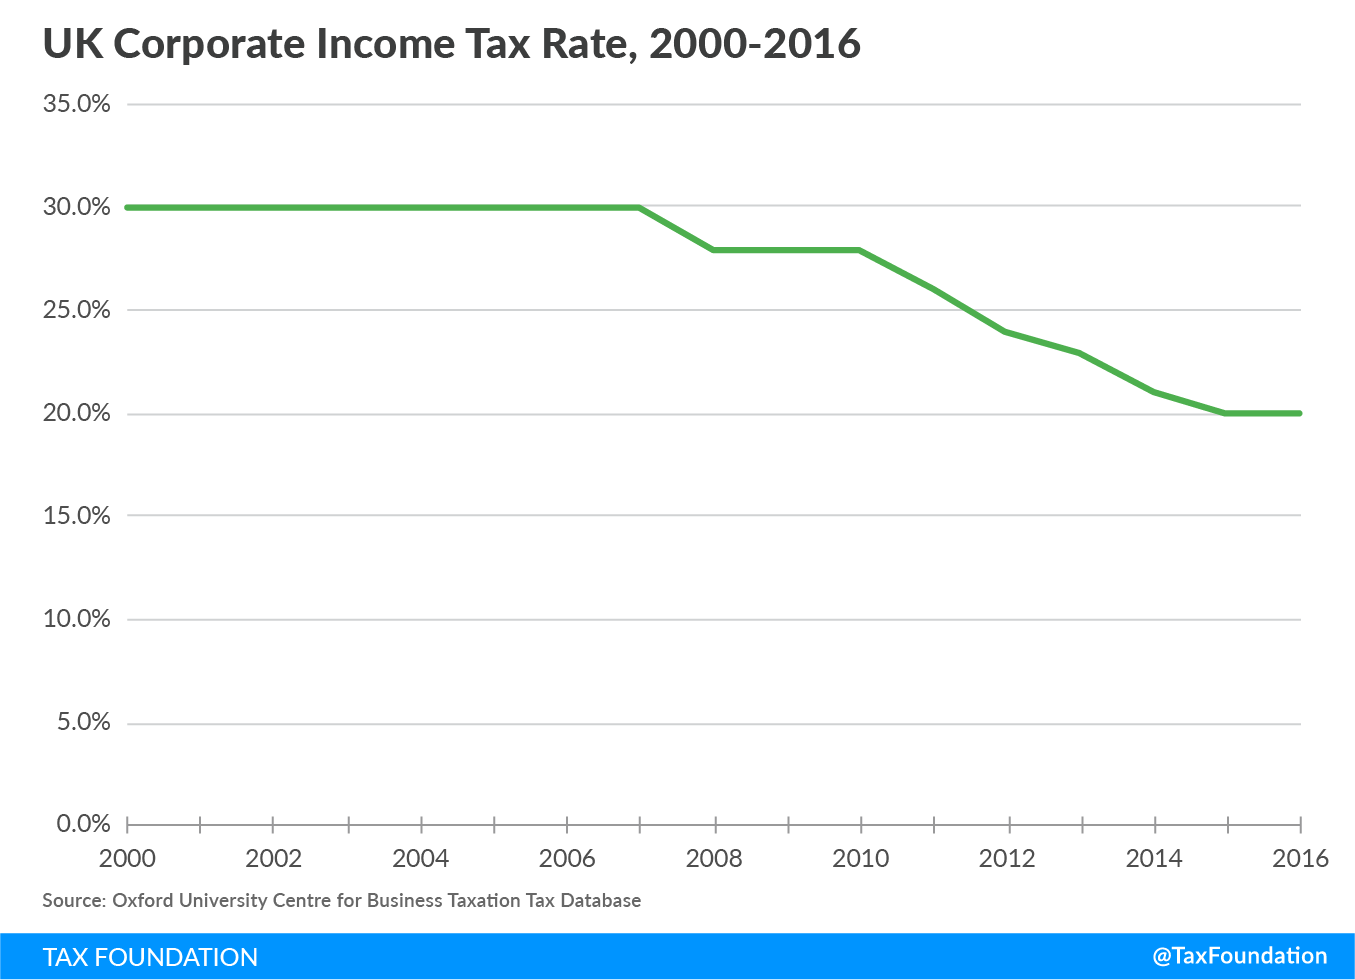 UK Corporate Income Tax Rate, 2000-2016